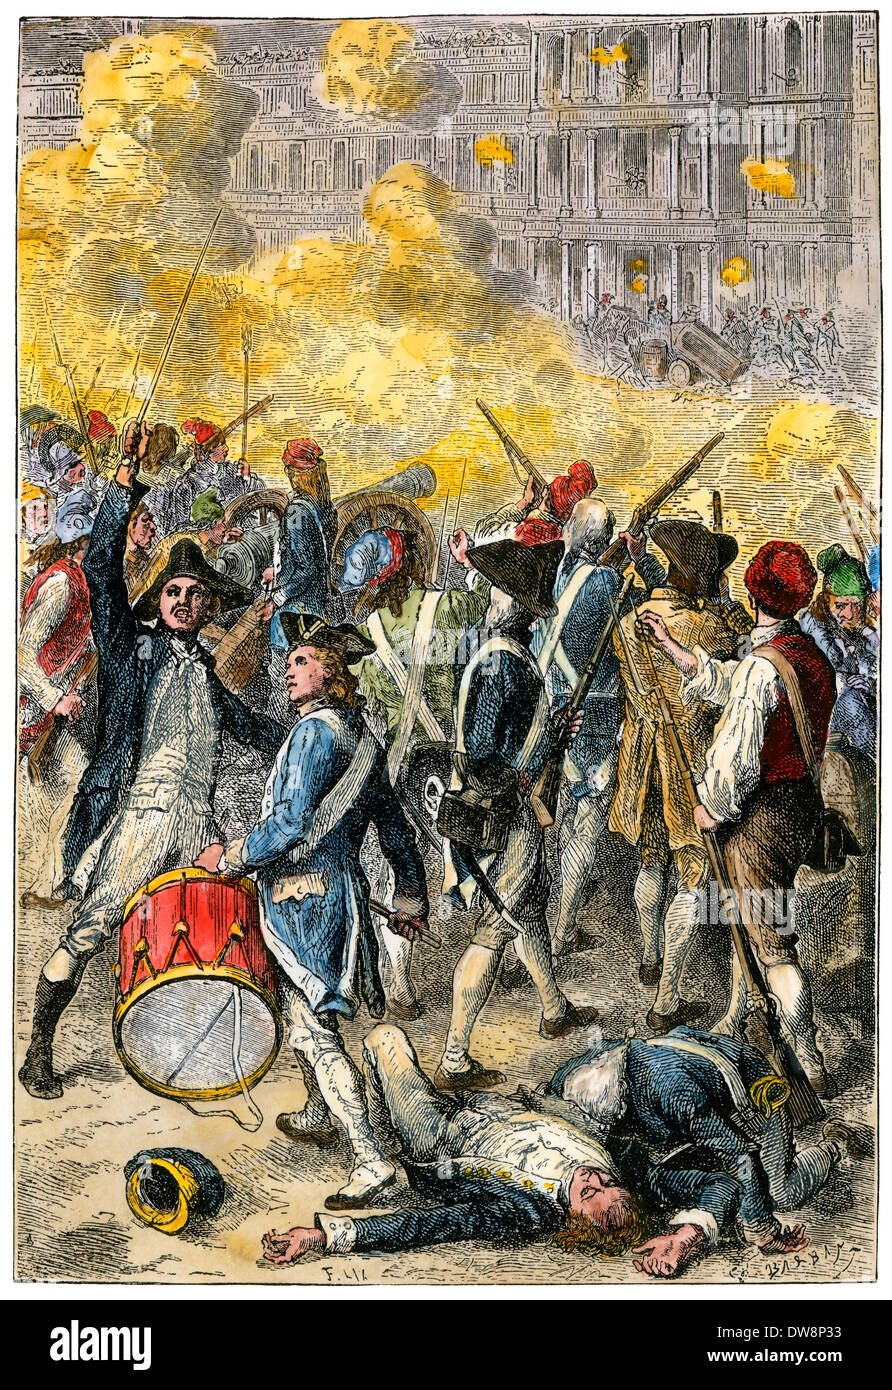 Fighting in the streets of Paris, French Revolution. Hand-colored woodcut Stock Photo